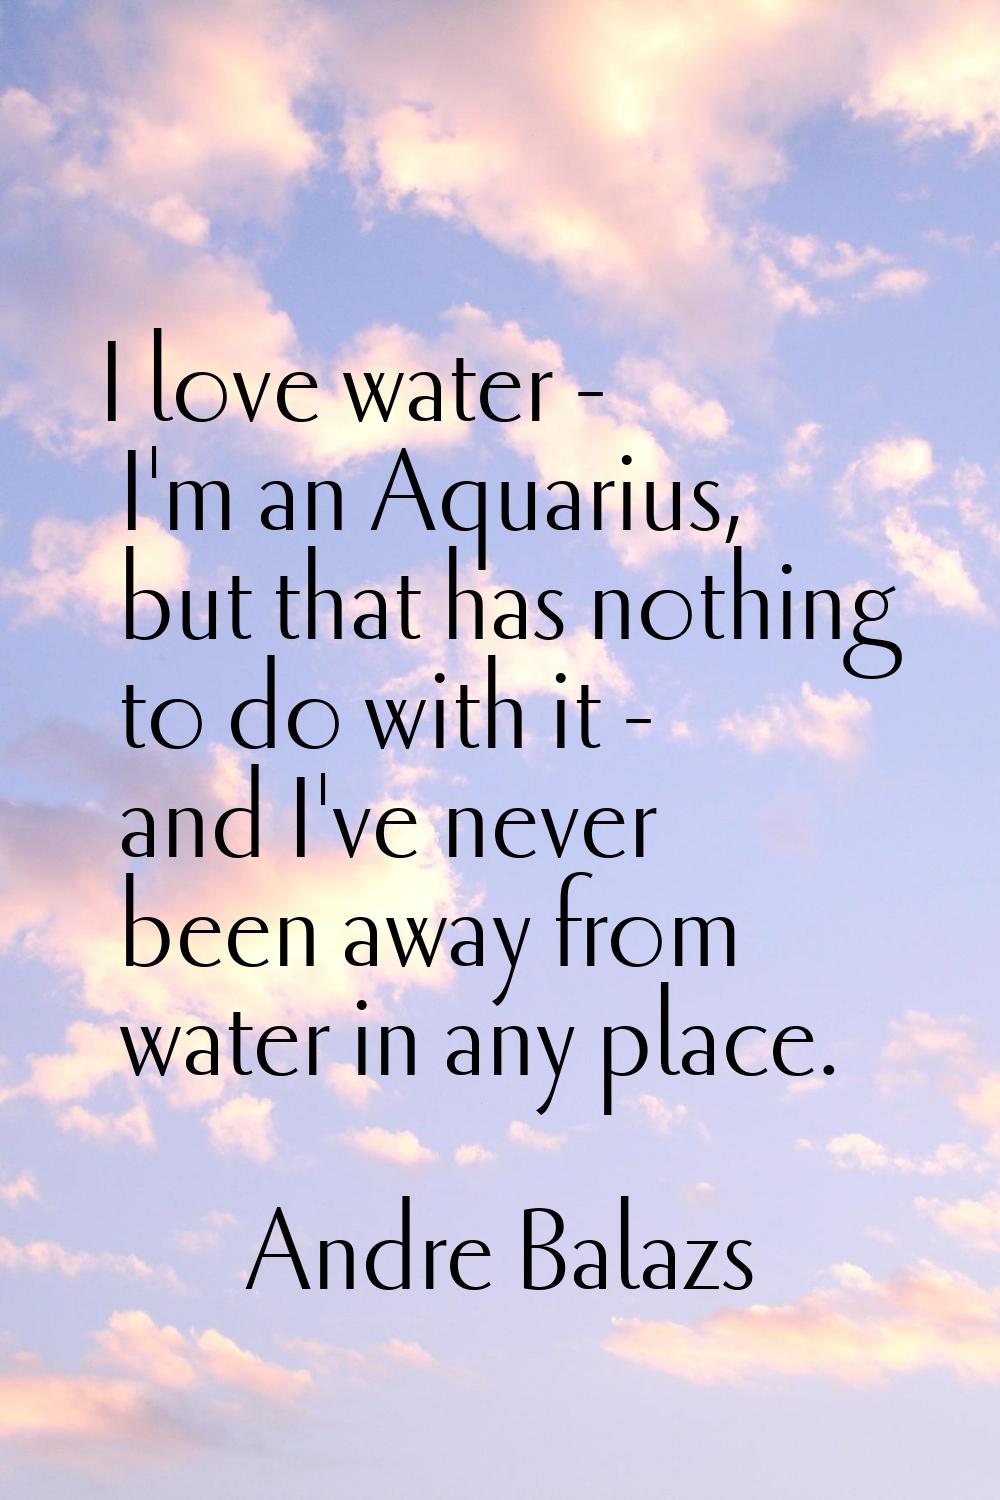 I love water - I'm an Aquarius, but that has nothing to do with it - and I've never been away from 